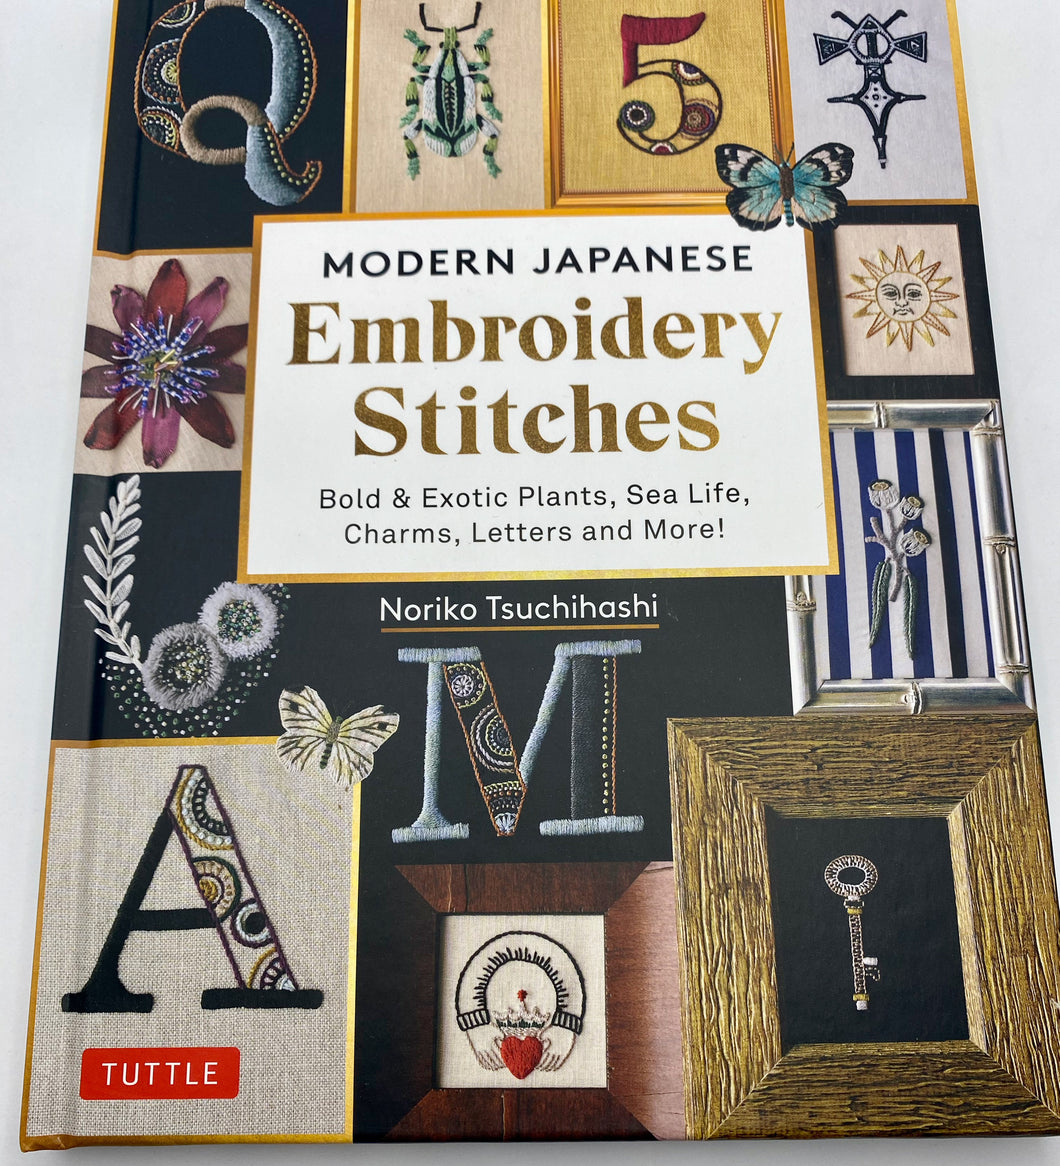 Modern Japanese Embroidery Stitches: Bold & Exotic Plants, Sea Life, Charms, Letters and More! by Noriko Tsuchihashi